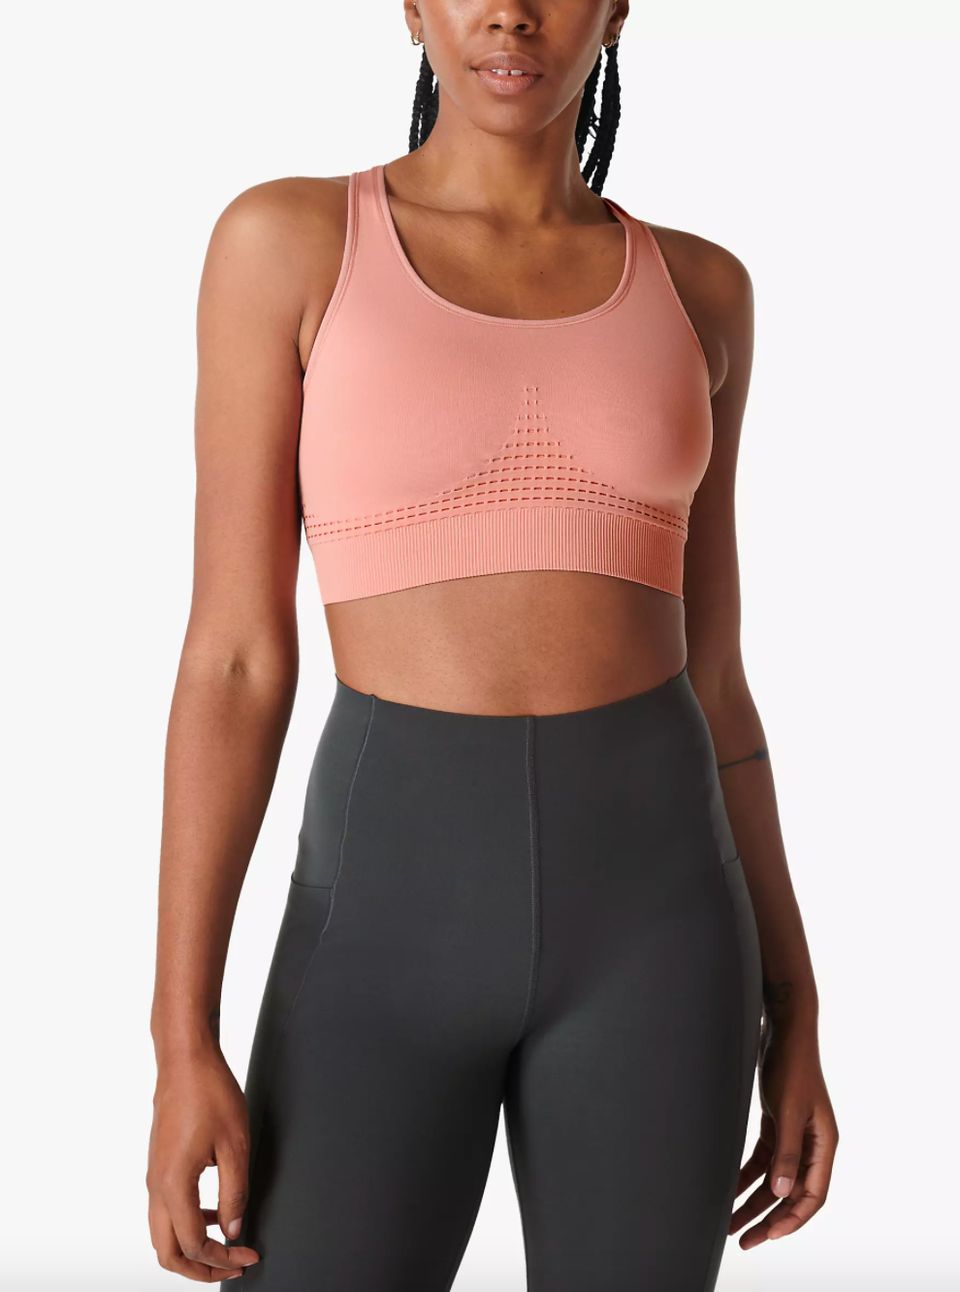 Sports Bras: How To Find A Supportive One That's Actually Worth